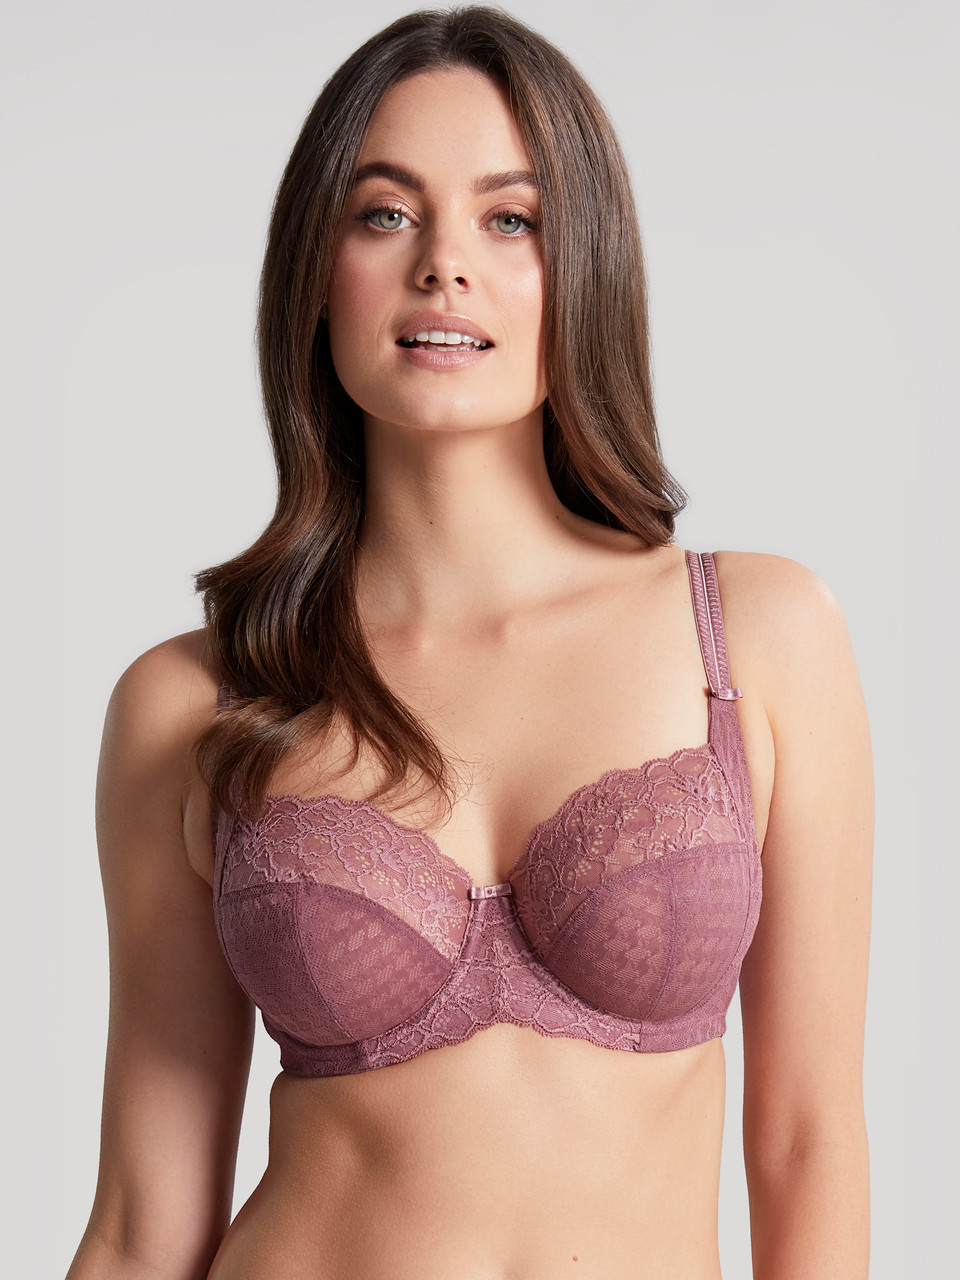 Comparing a 38E with 32G in Panache Envy Balconnet Bra (7285